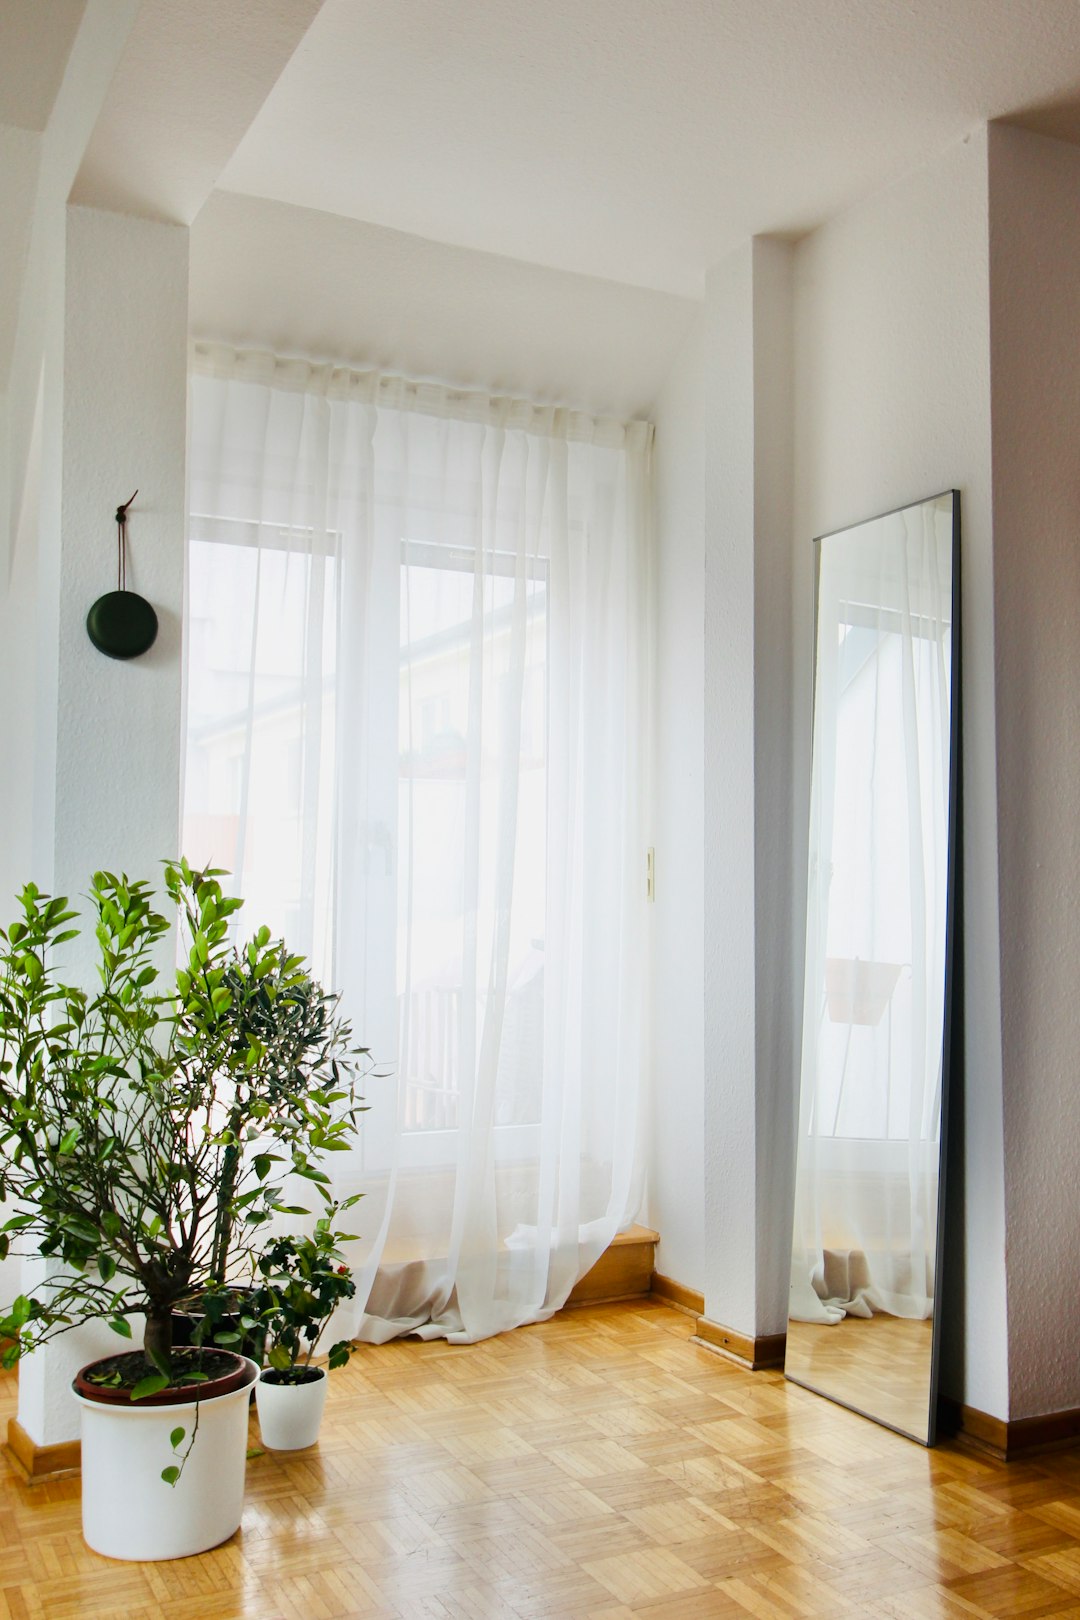  green potted plant near white window curtain curtains